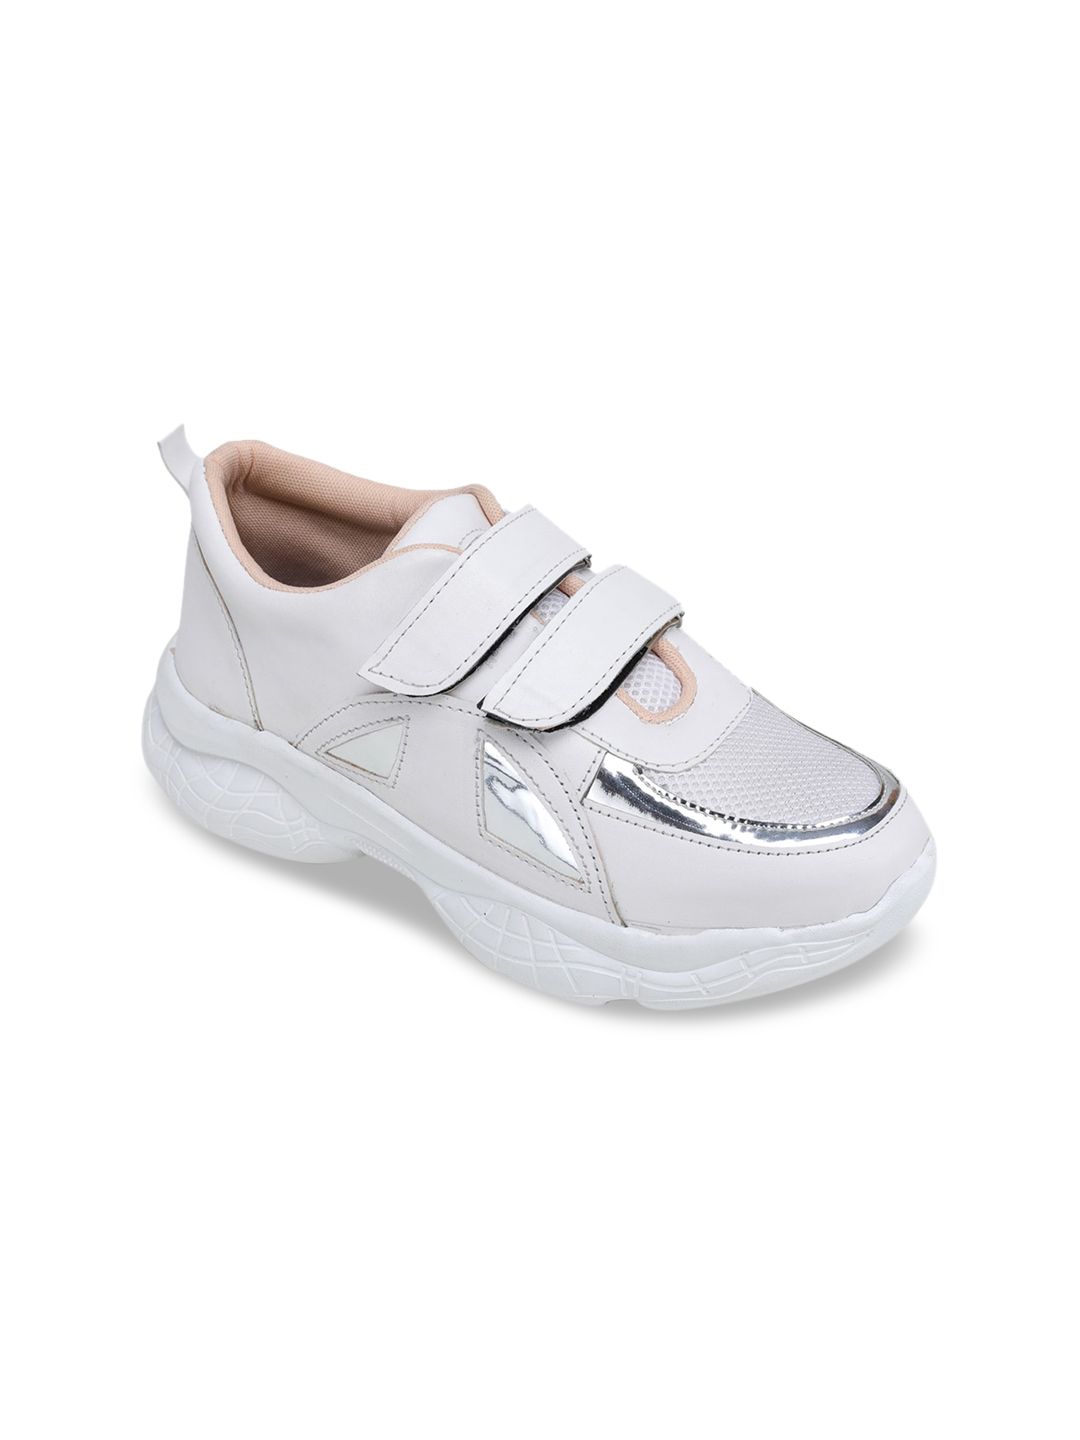 TRASE Women White Textured  Sneakers Price in India